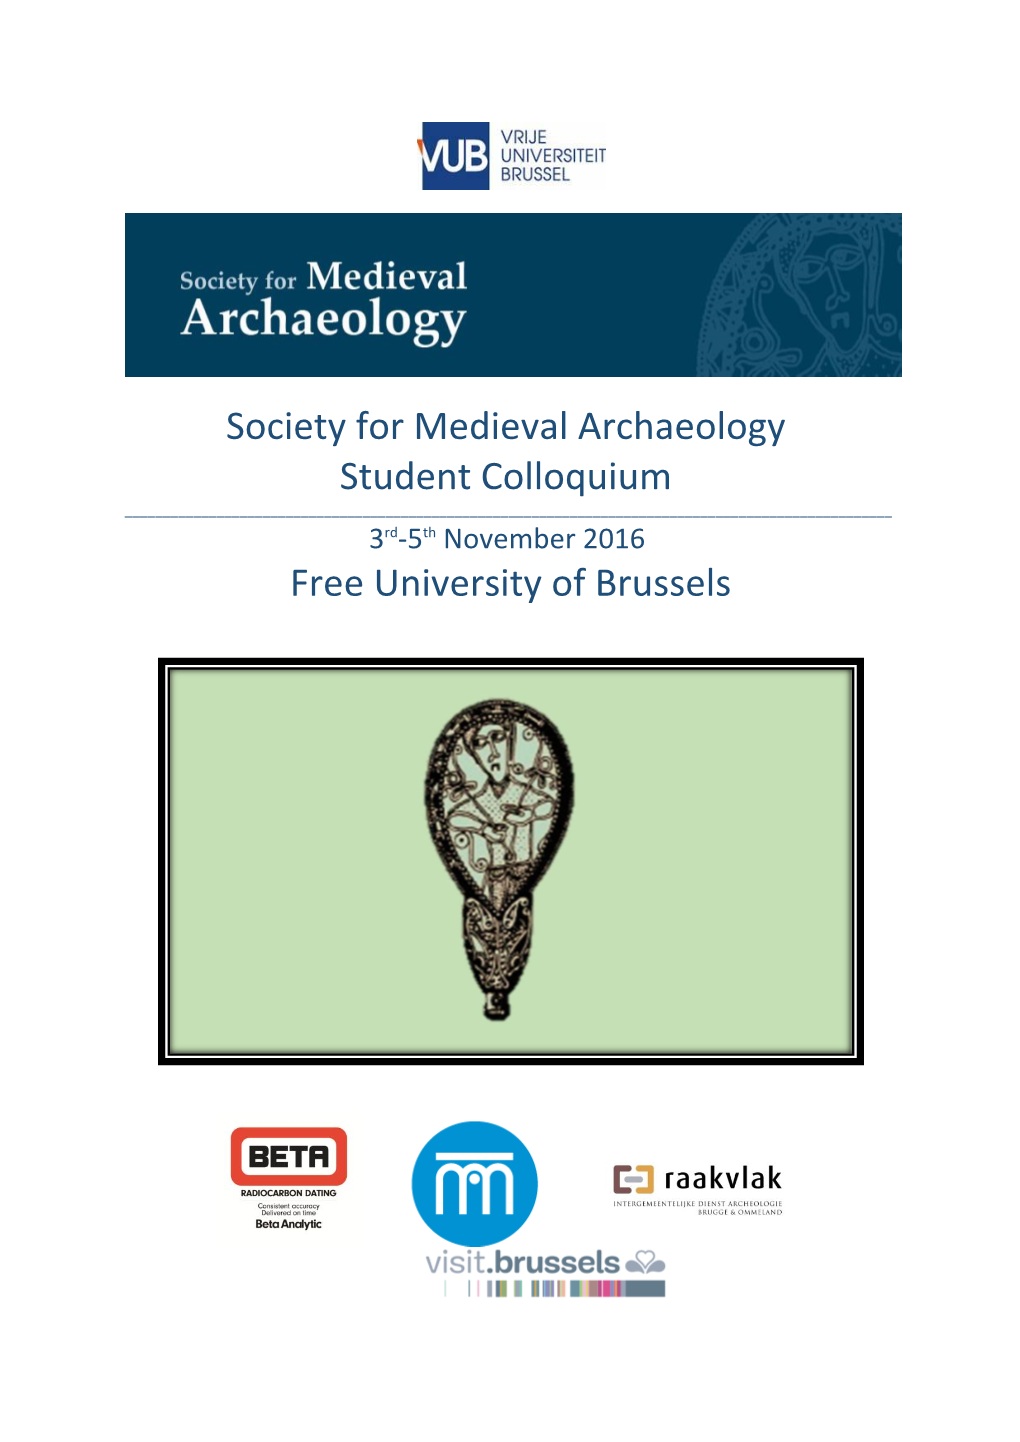 Society for Medieval Archaeology Student Colloquium Free University